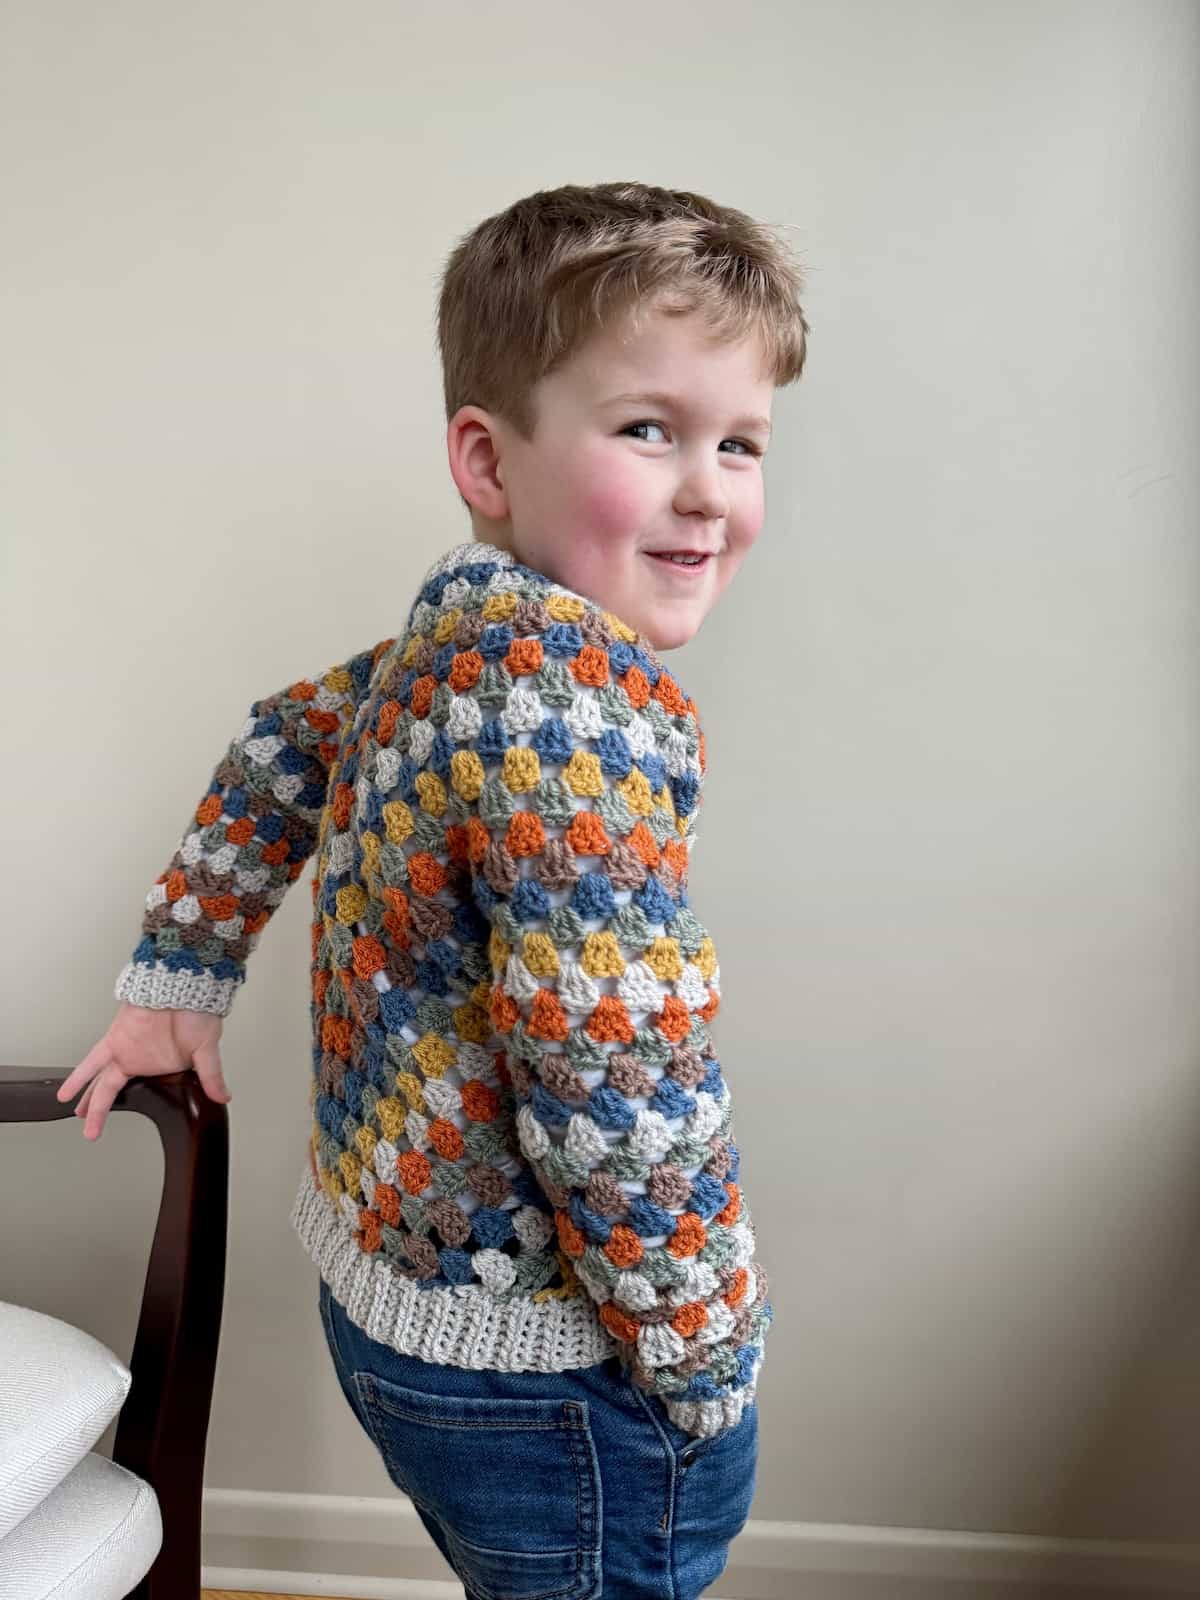 A child in a crocheted sweater poses in front of a chair.